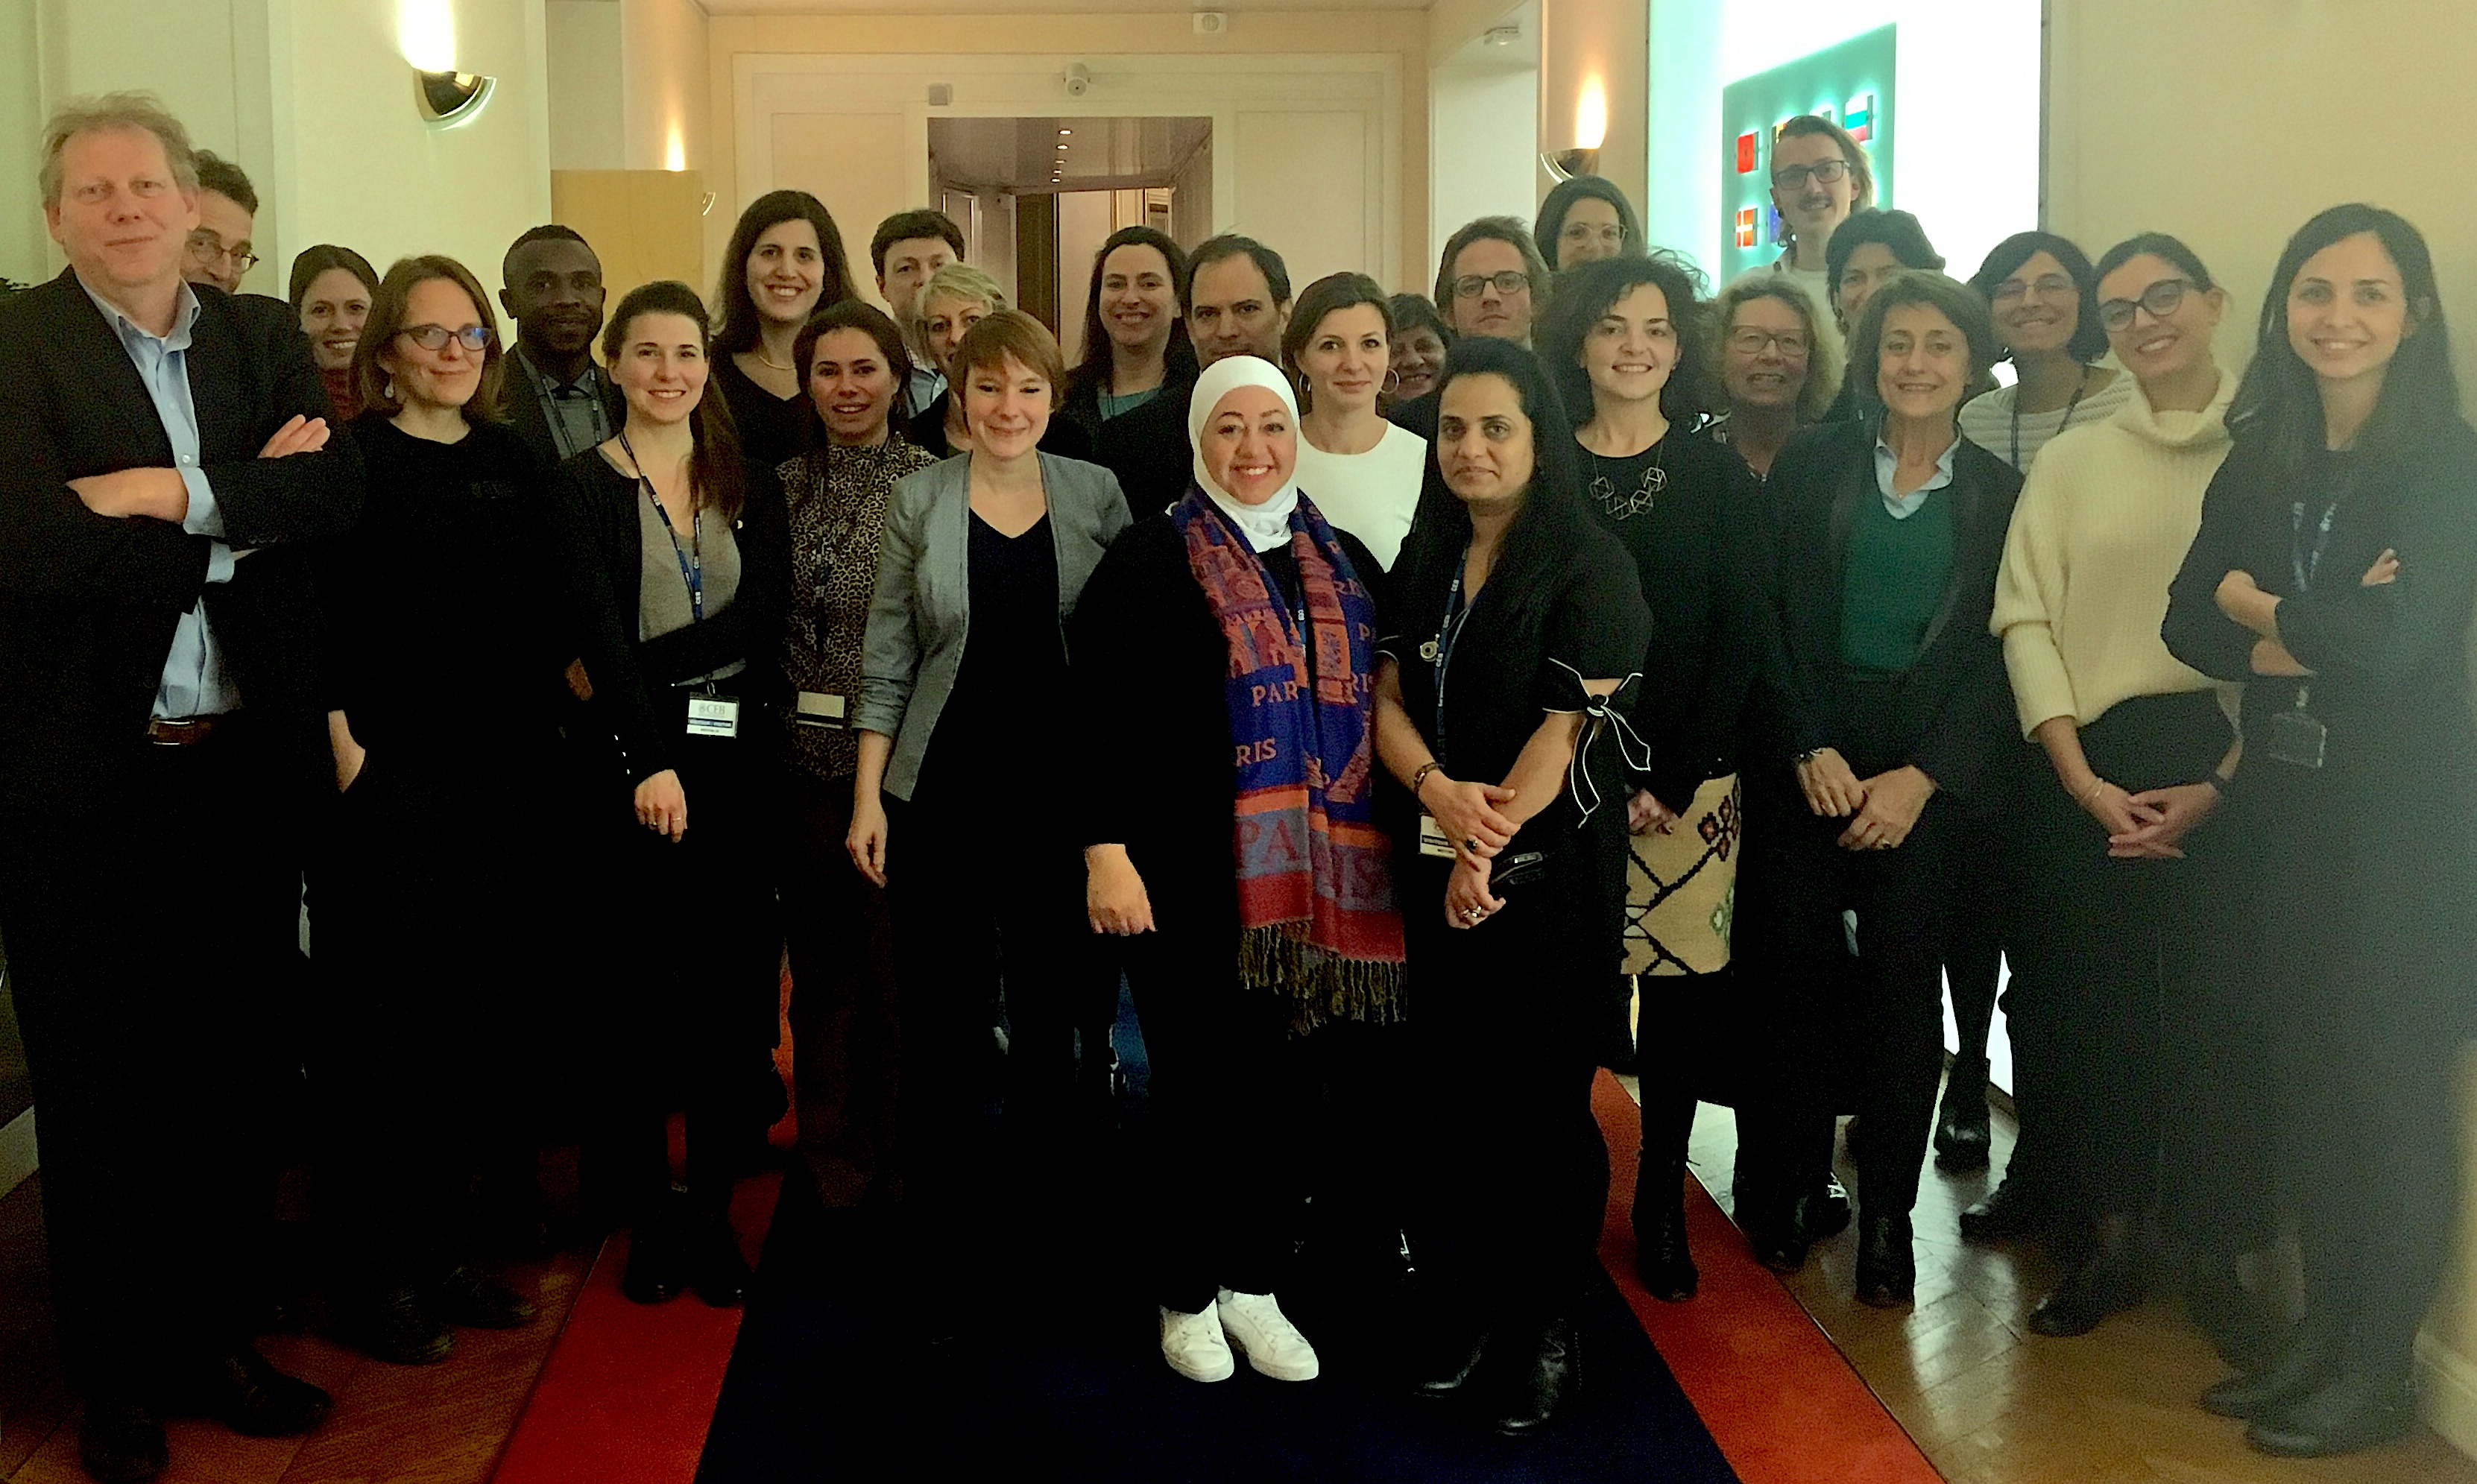 Group picture of the Inclusion of Migrants and Refugees Partnership at the 13th meeting in Paris in February 2019